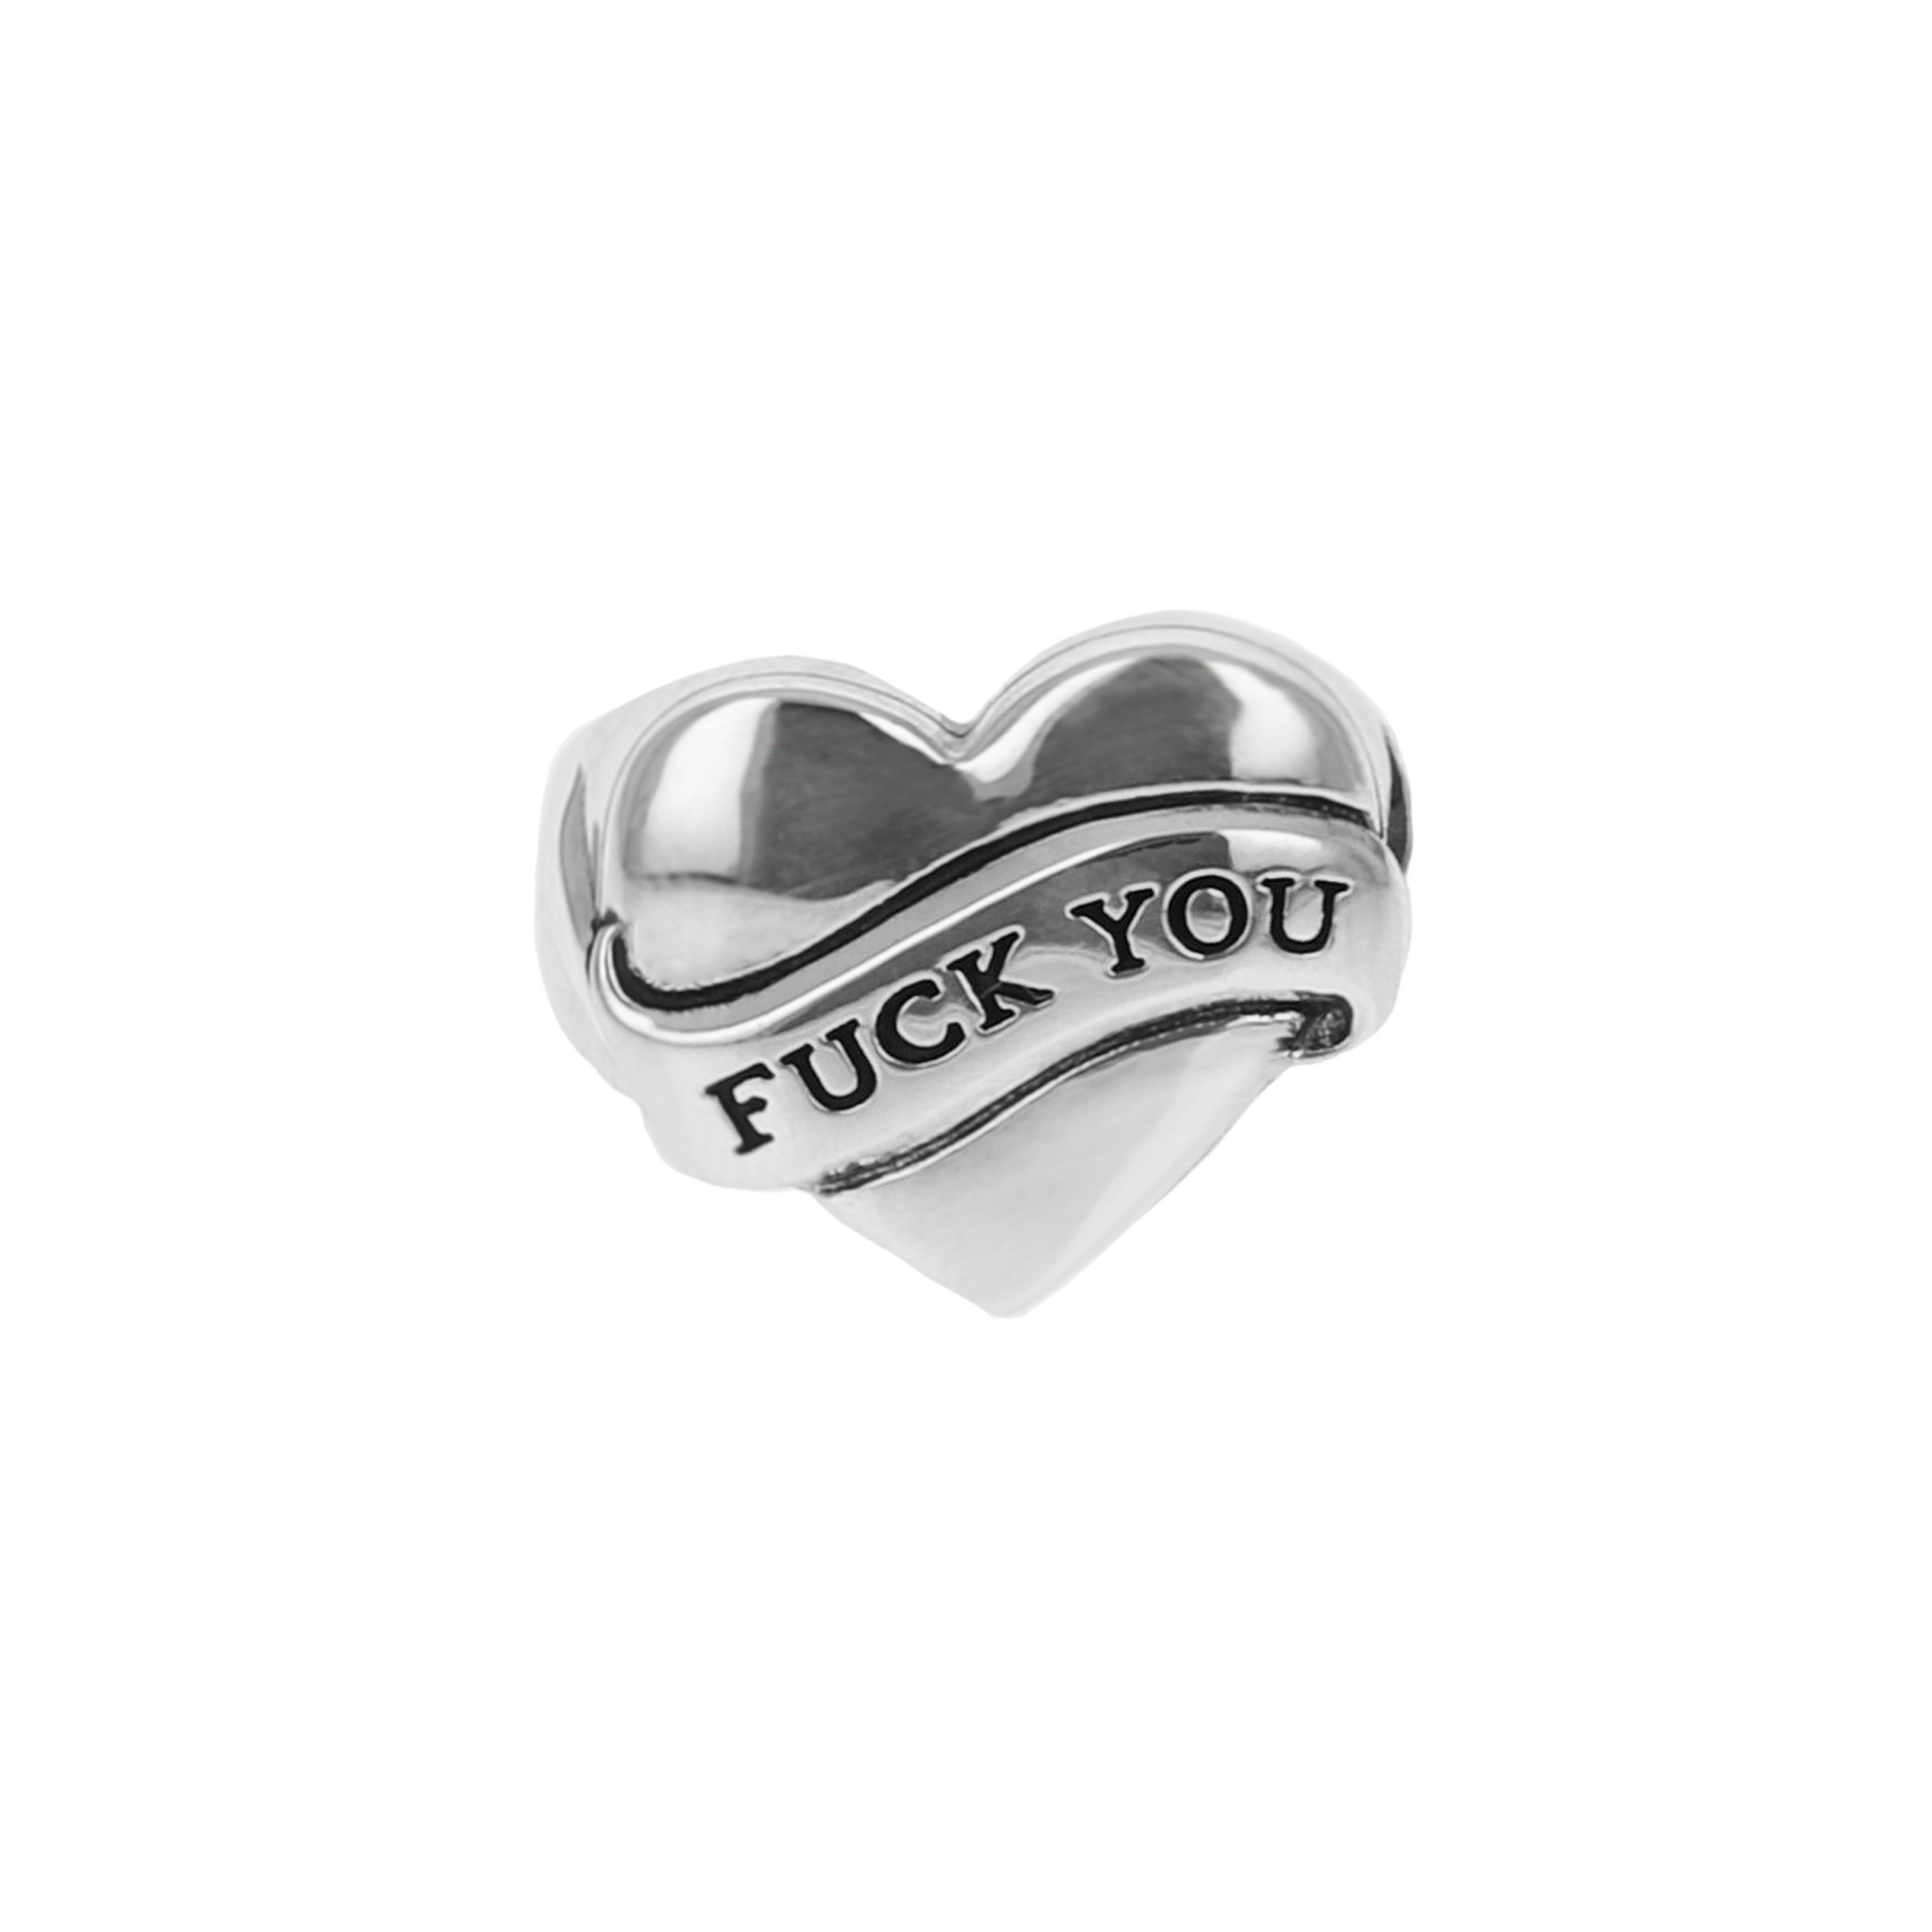 Tattoo Fuck You Heart Ring on white background